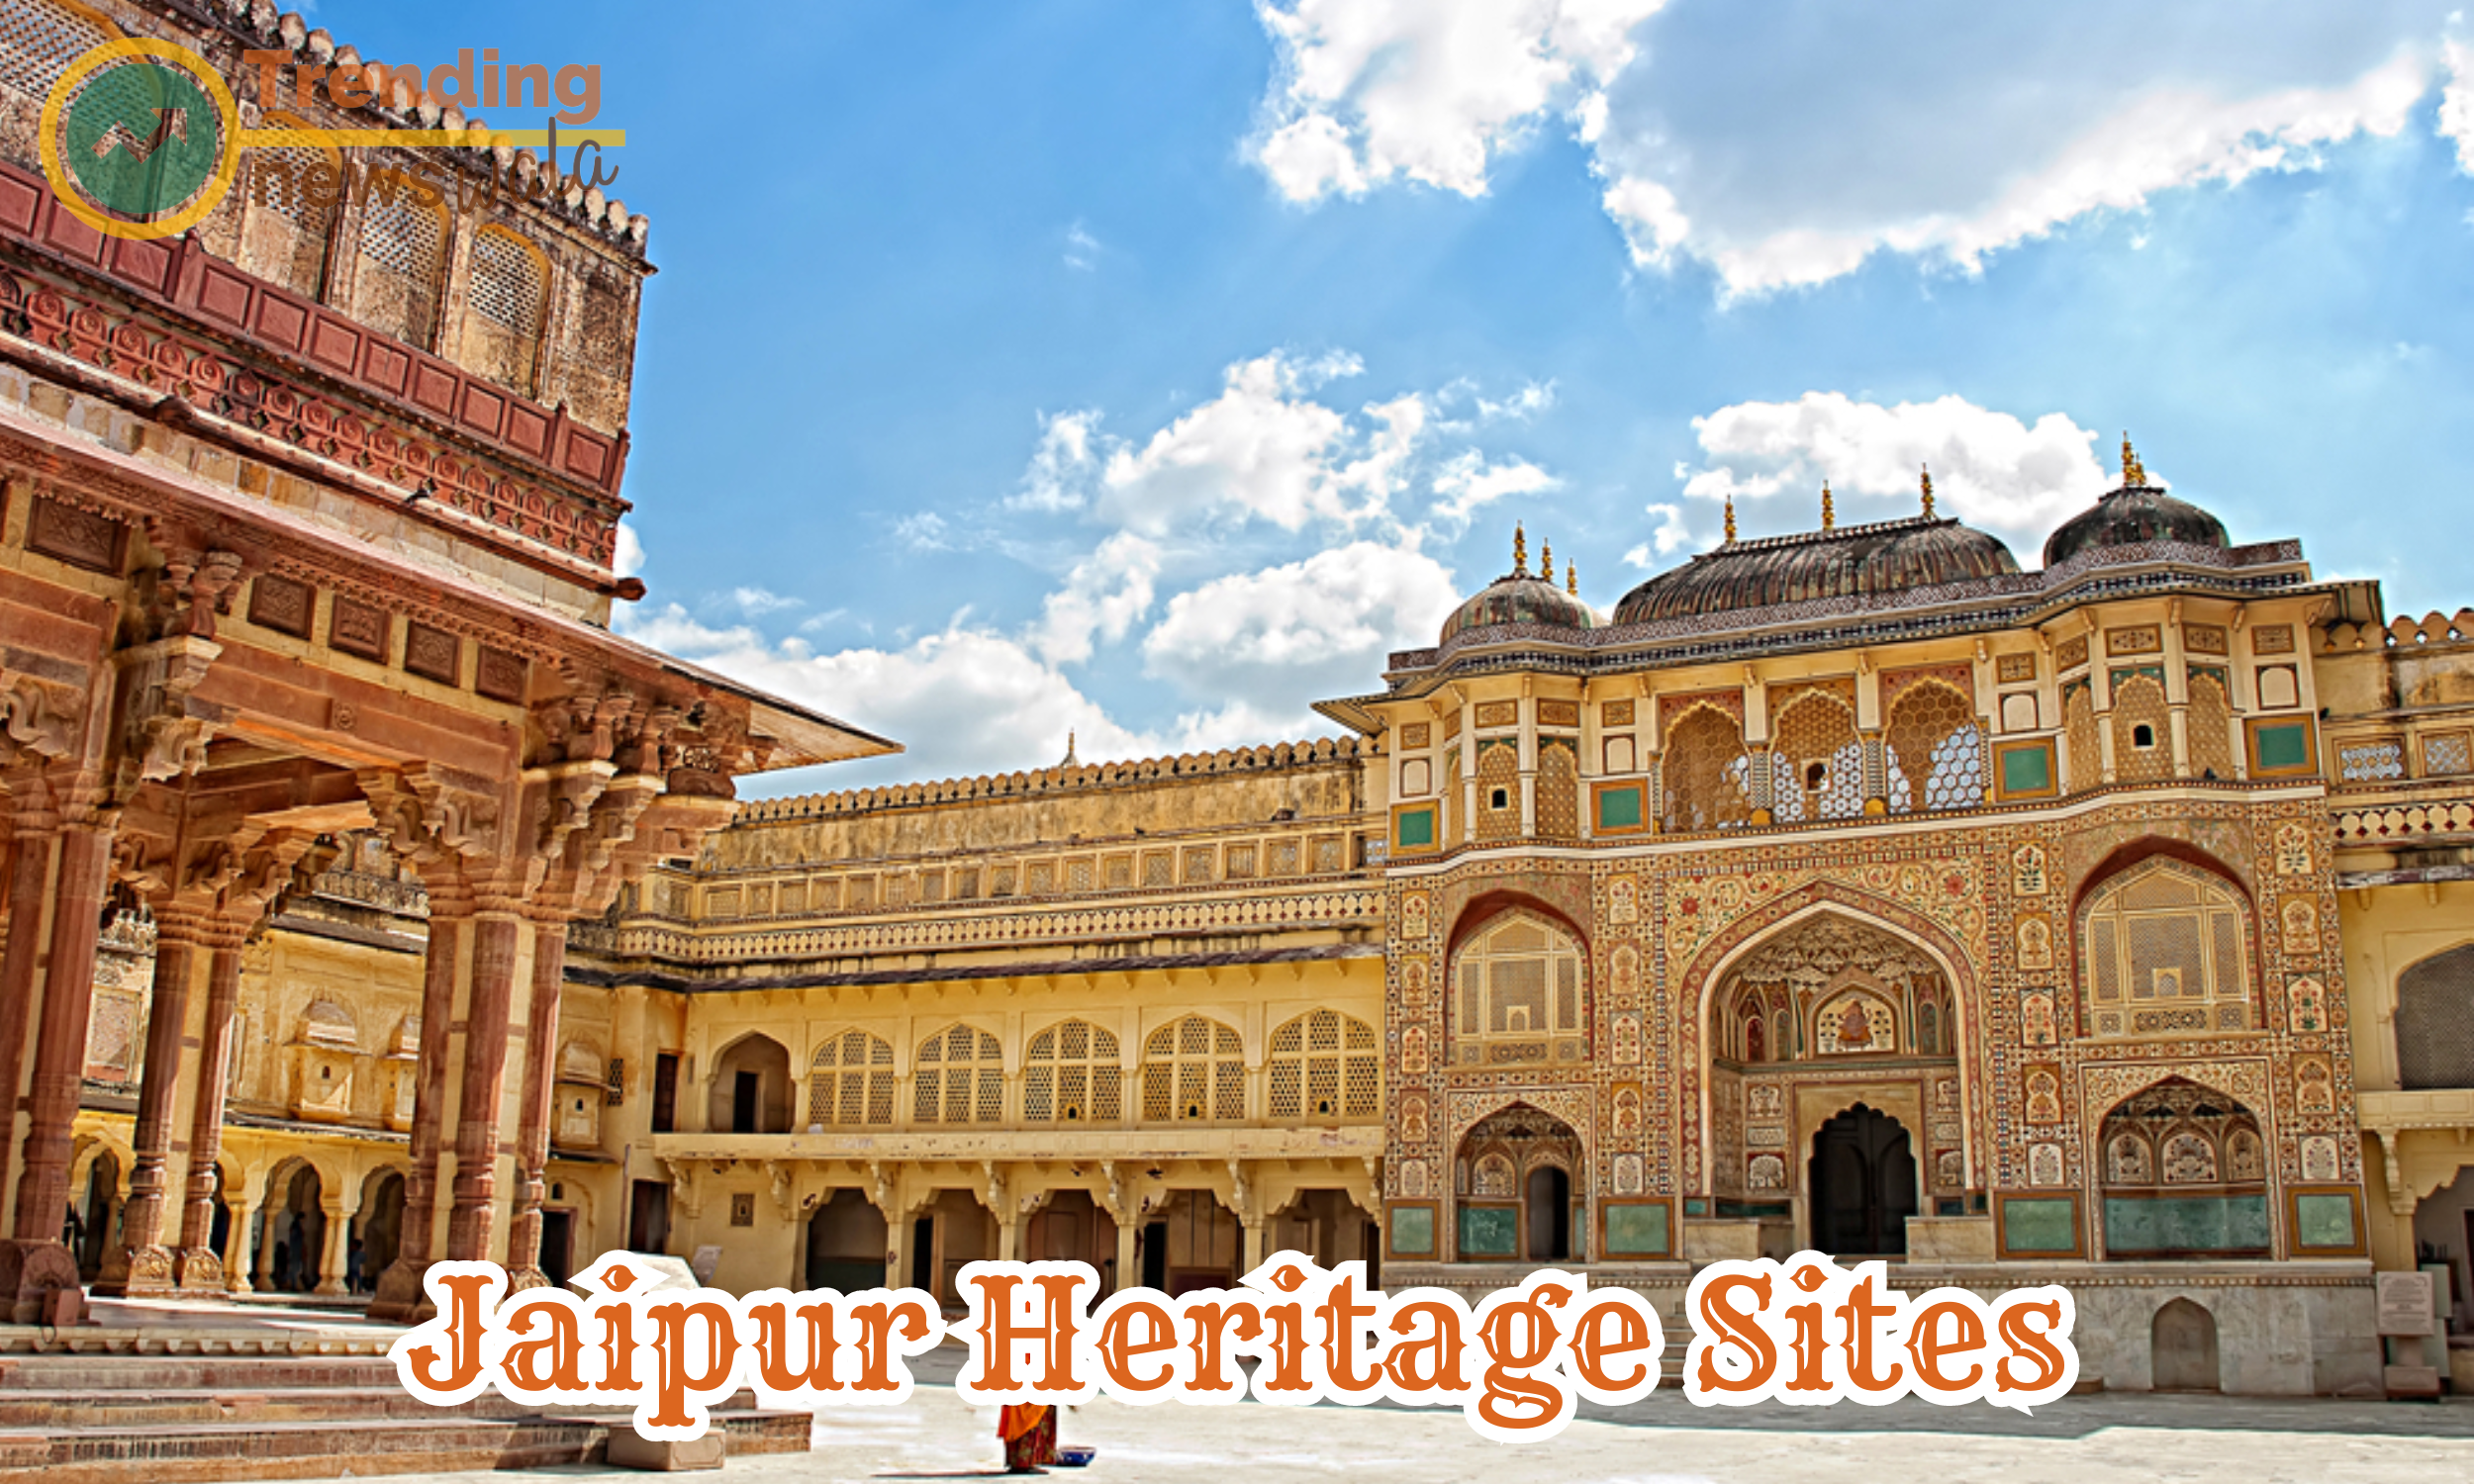 Jaipur is a city rich in history and culture, and it boasts numerous heritage sites that showcase